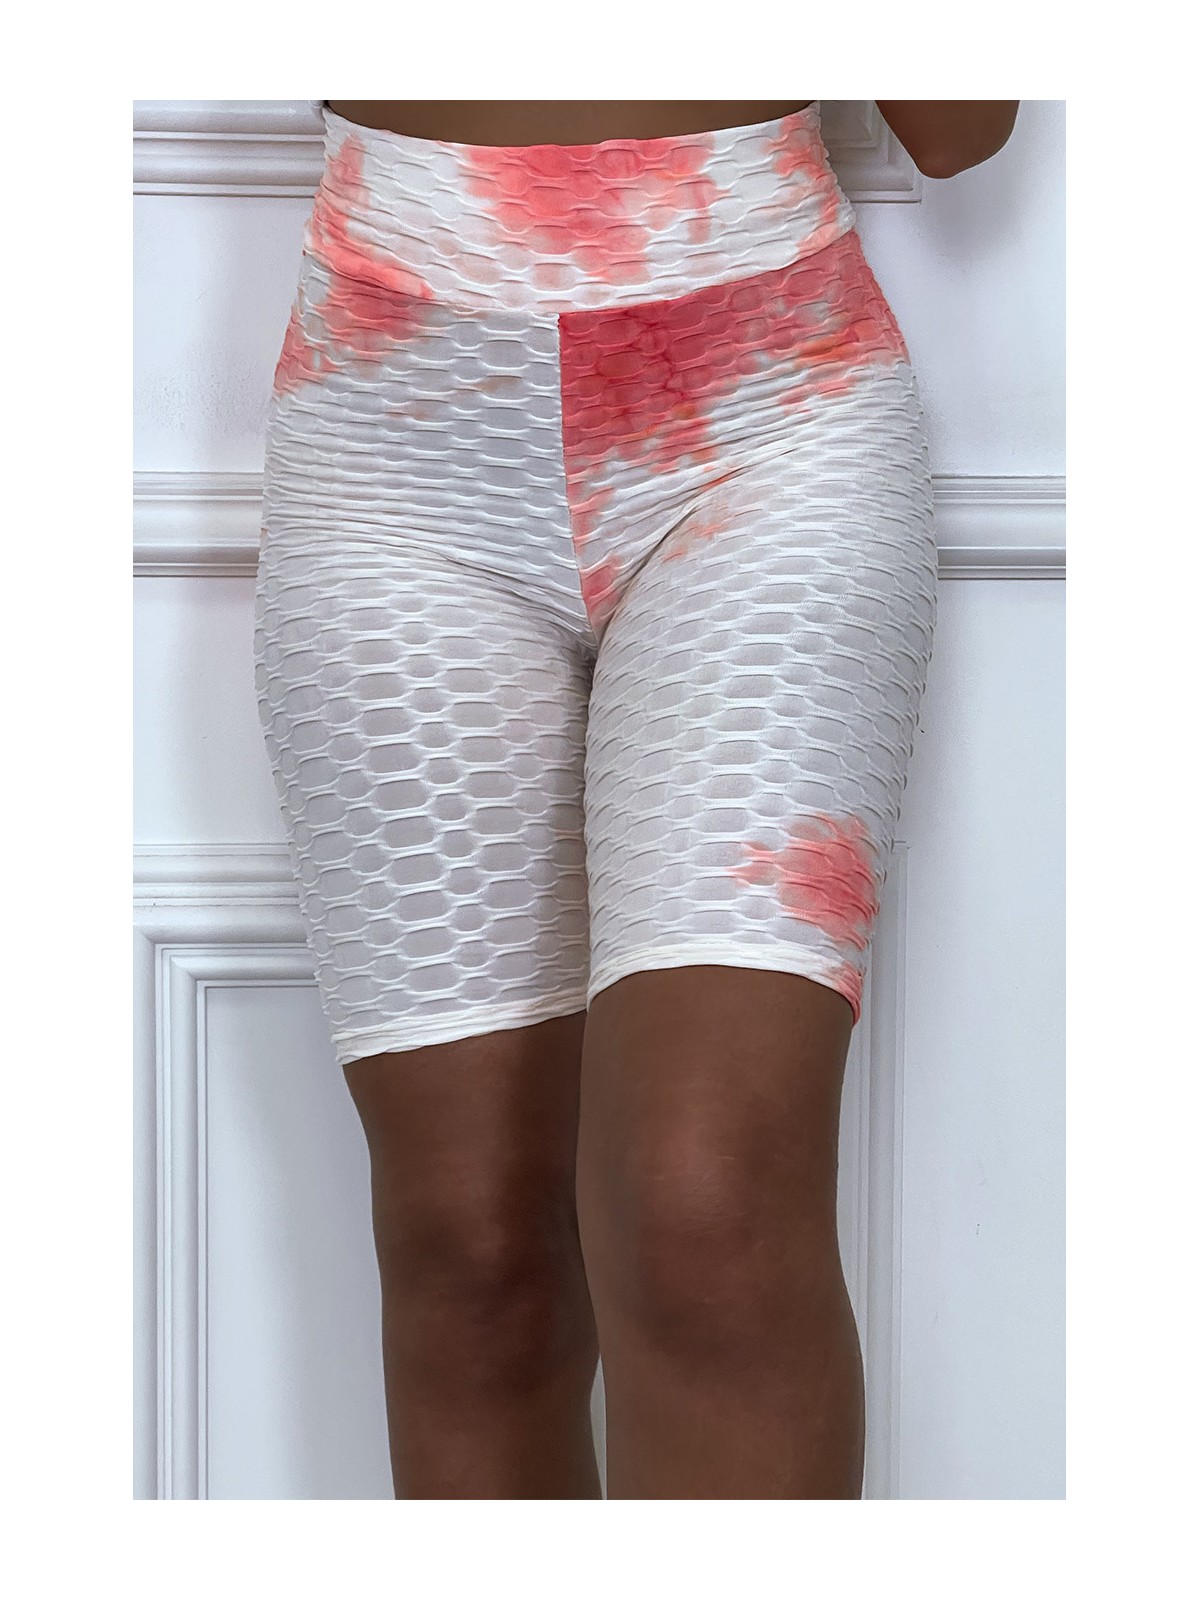 Cycliste tie and dye corail push-up et anti-cellulite - 2